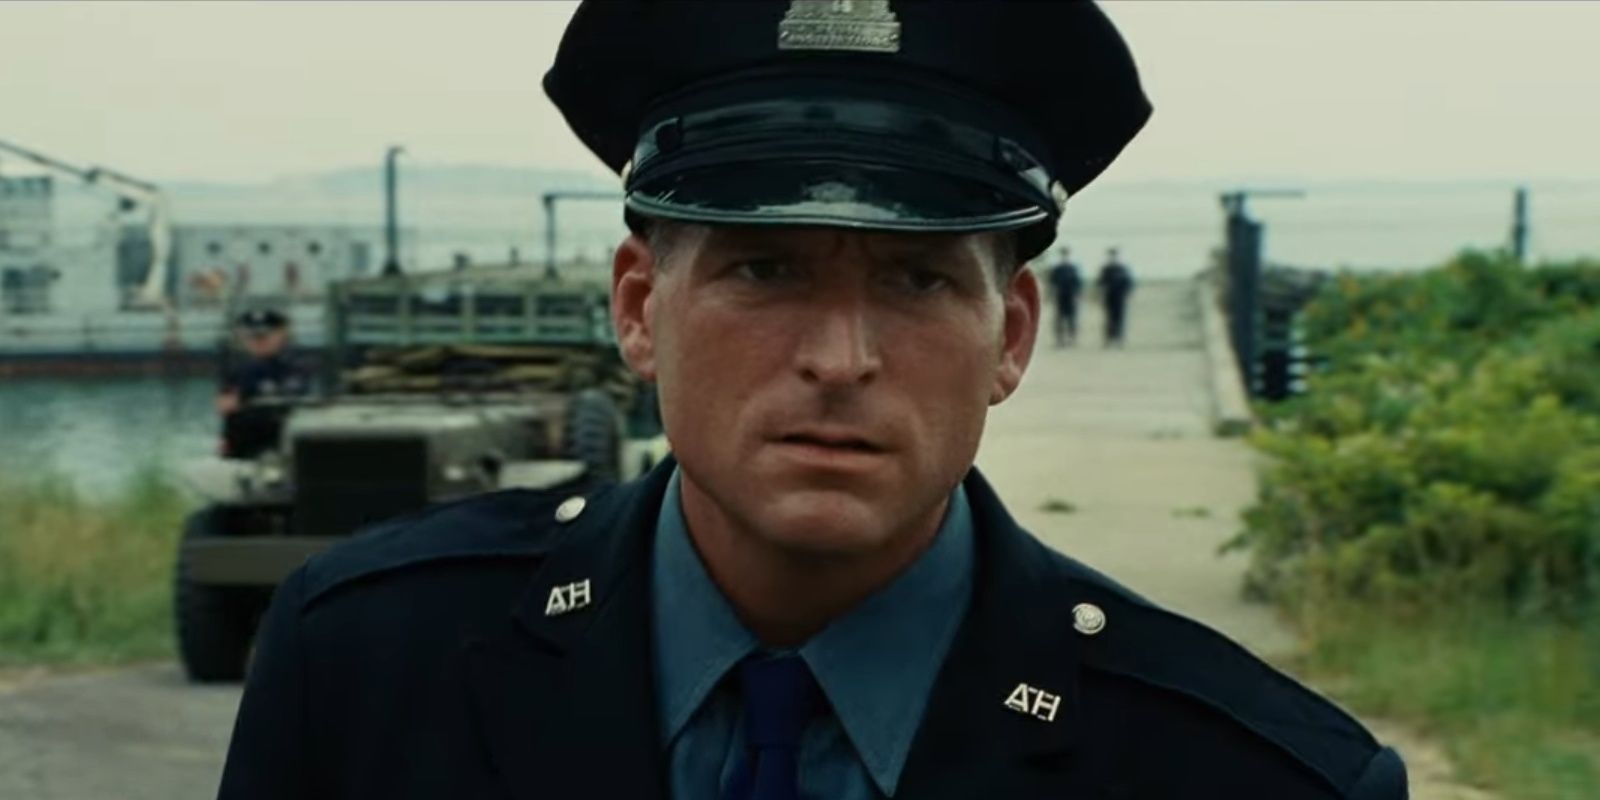 A Guard Giving A Bad Look From Shutter Island